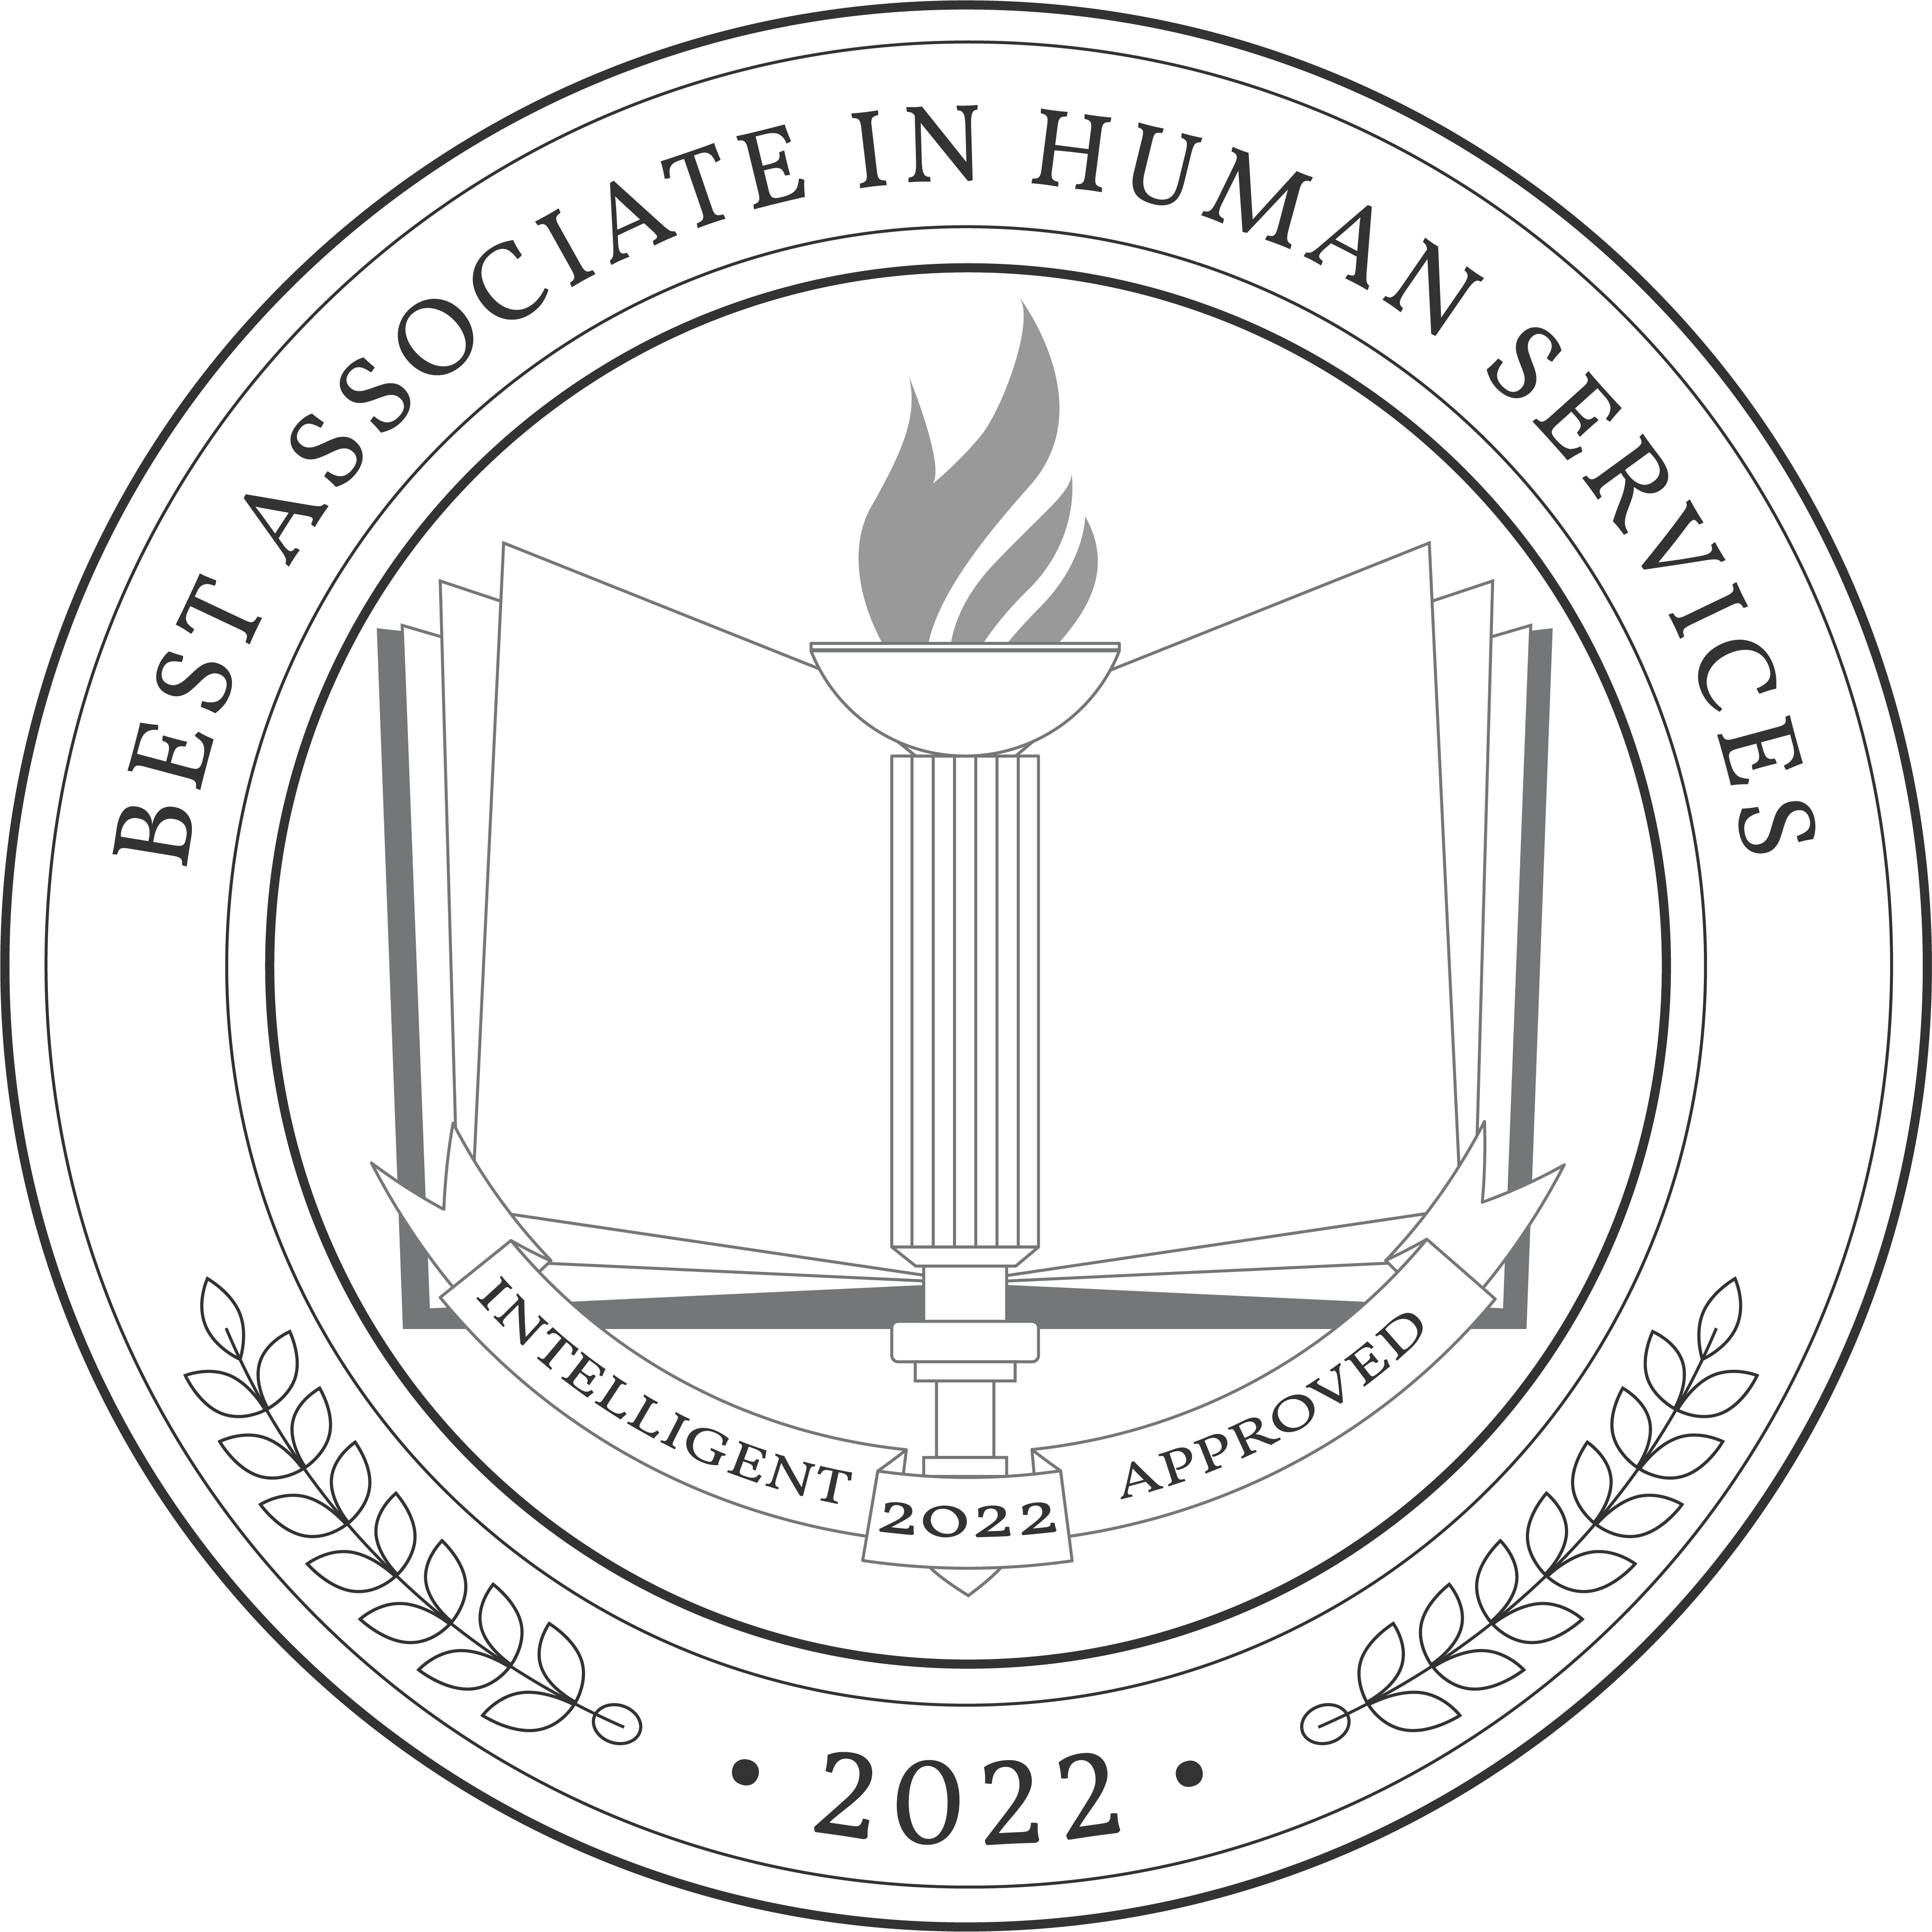 Best Associate in Human Services Badge